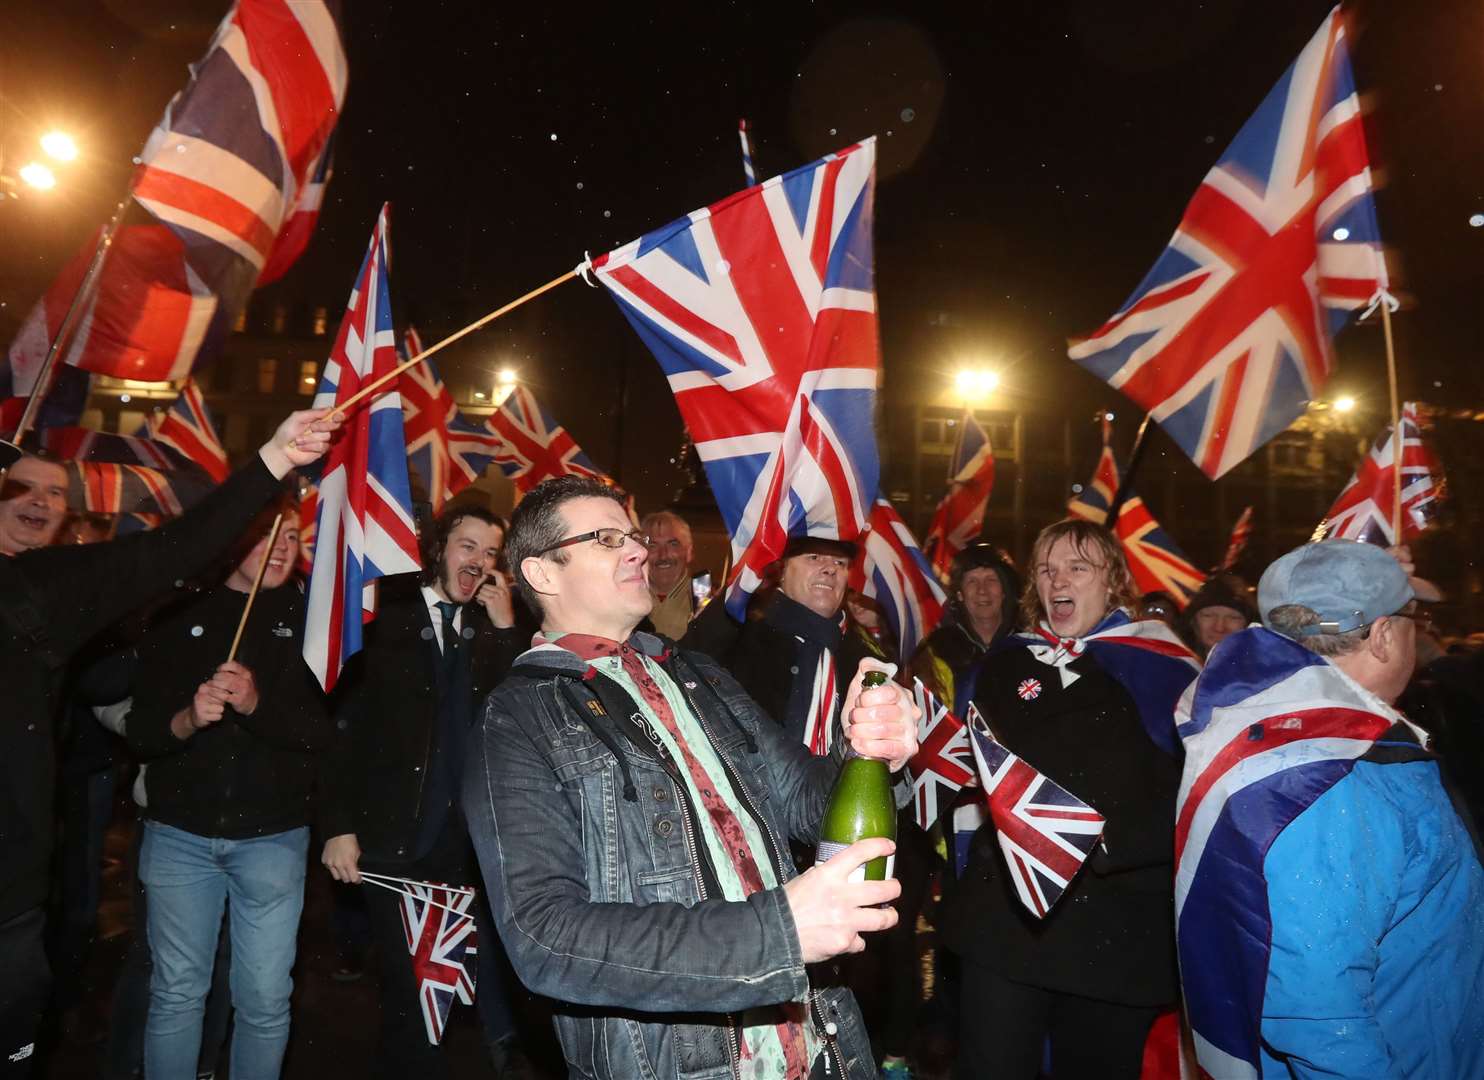 Celebrations were held by some as the UK officially left the EU on January 31 (Andrew Milligan/PA)